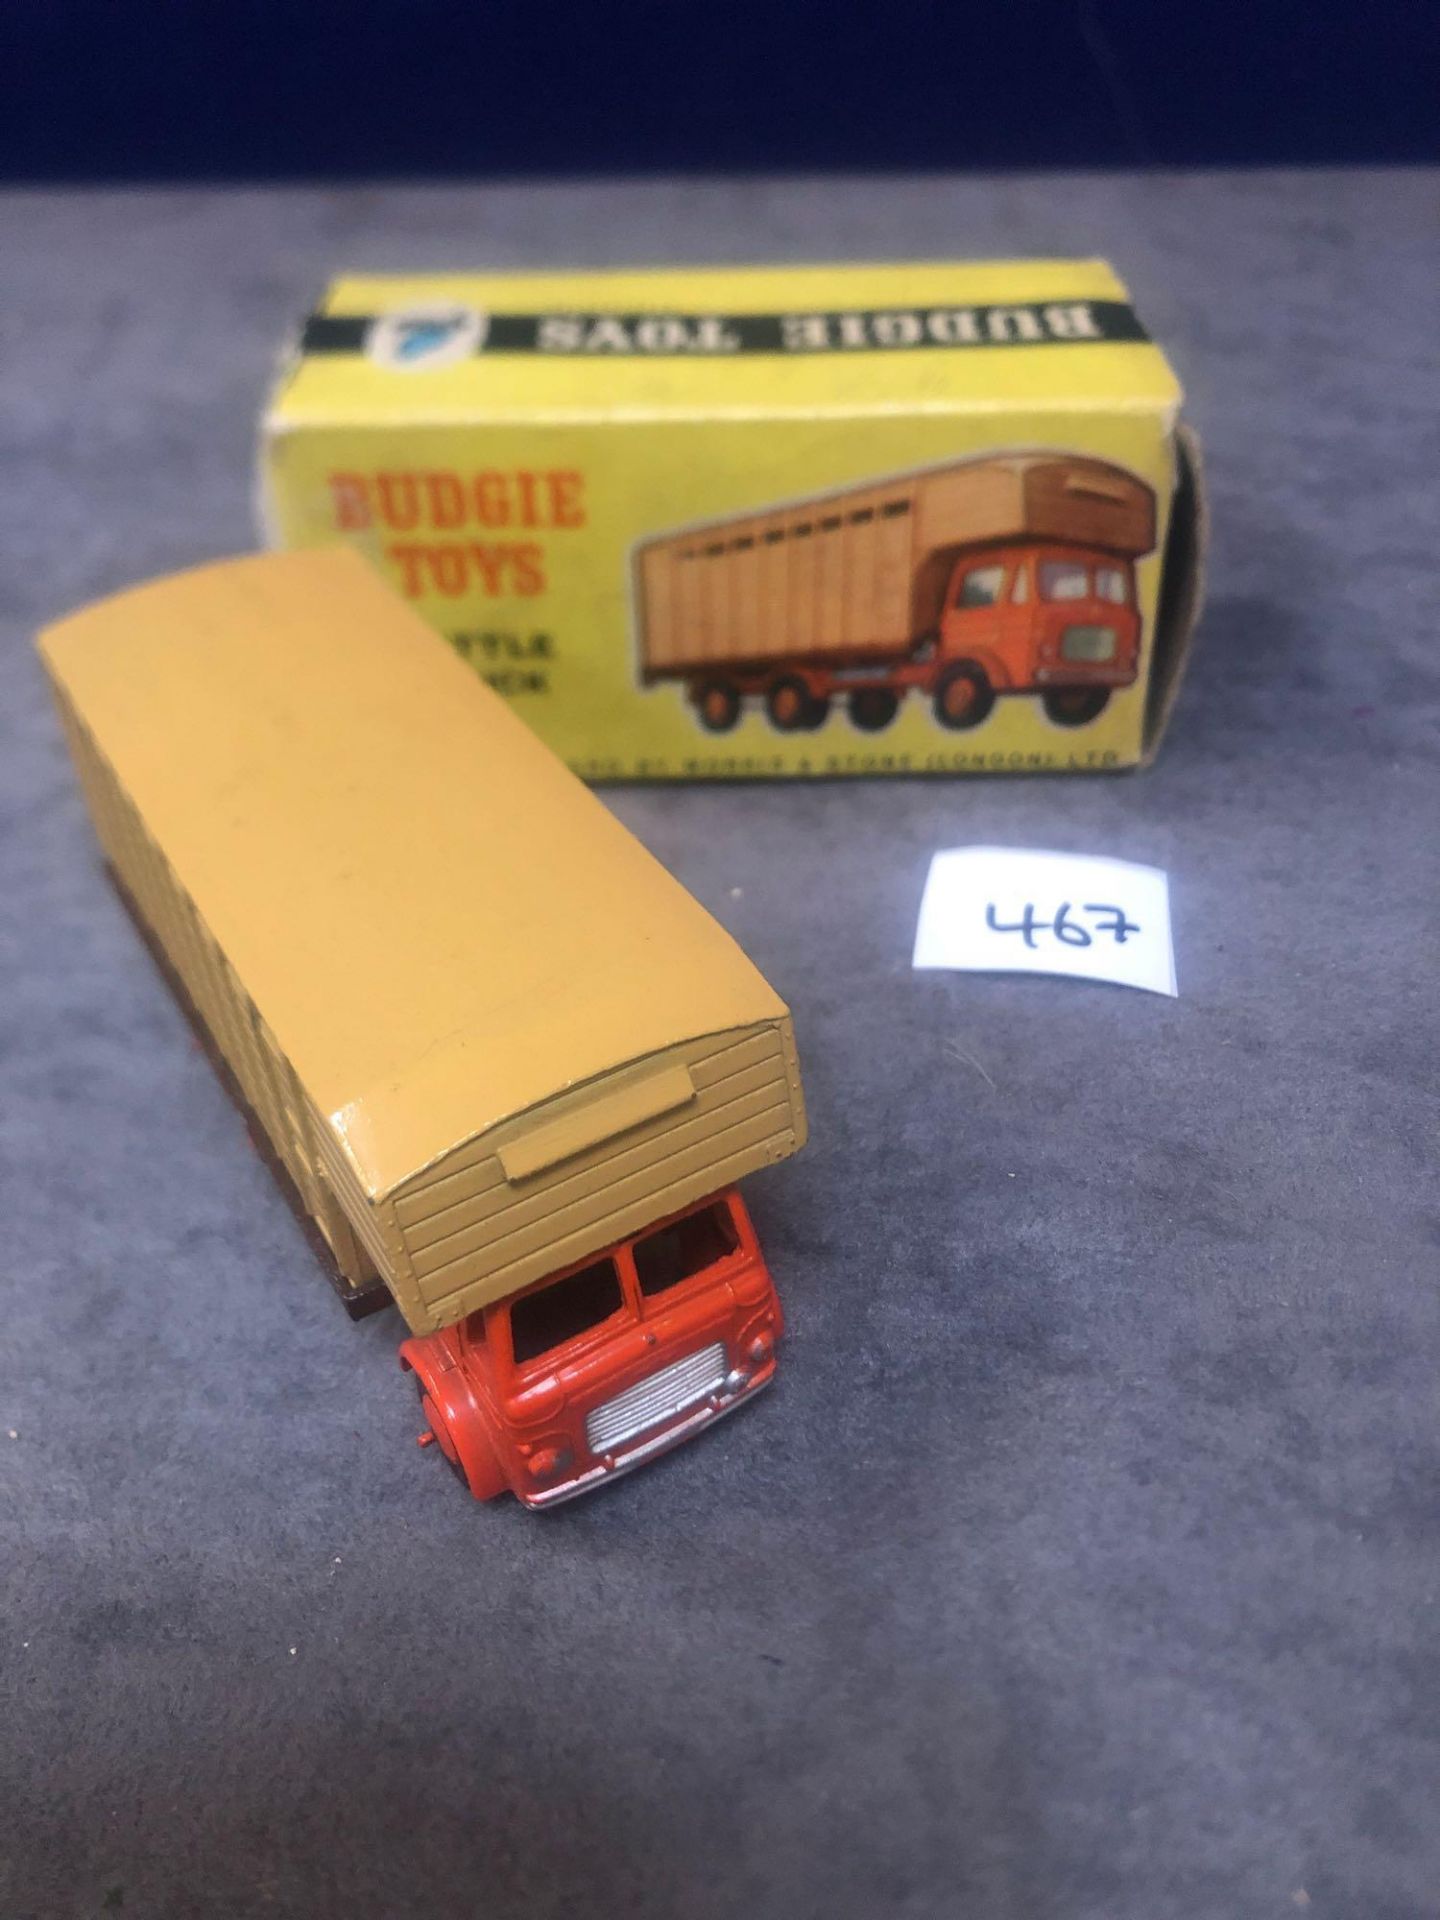 Budgie Toys Rare No.220 Leyland Hippo Cattle Truck Issued 1959-66 Length 97mm Mint Model In Firm Box